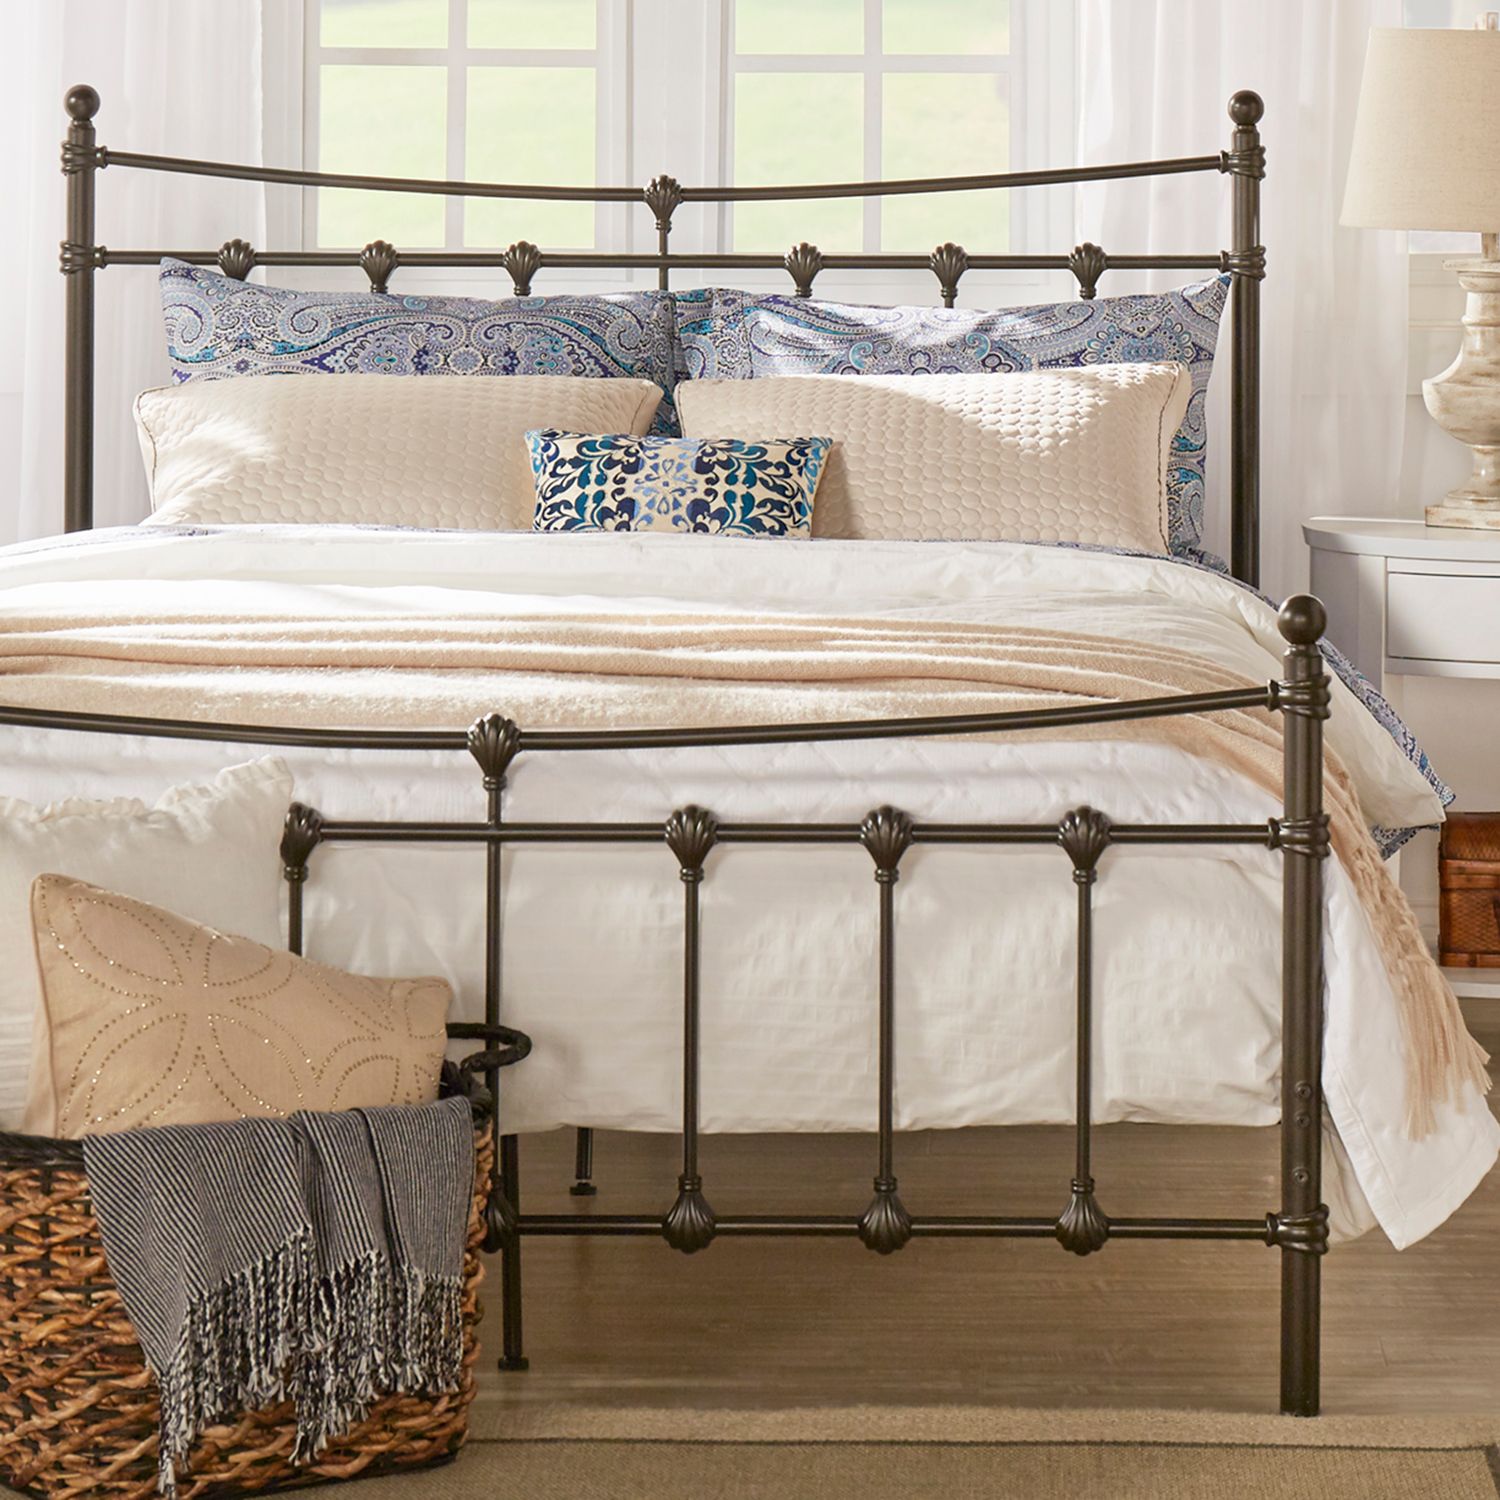 Image for HomeVance Sycamore Hills Bed at Kohl's.